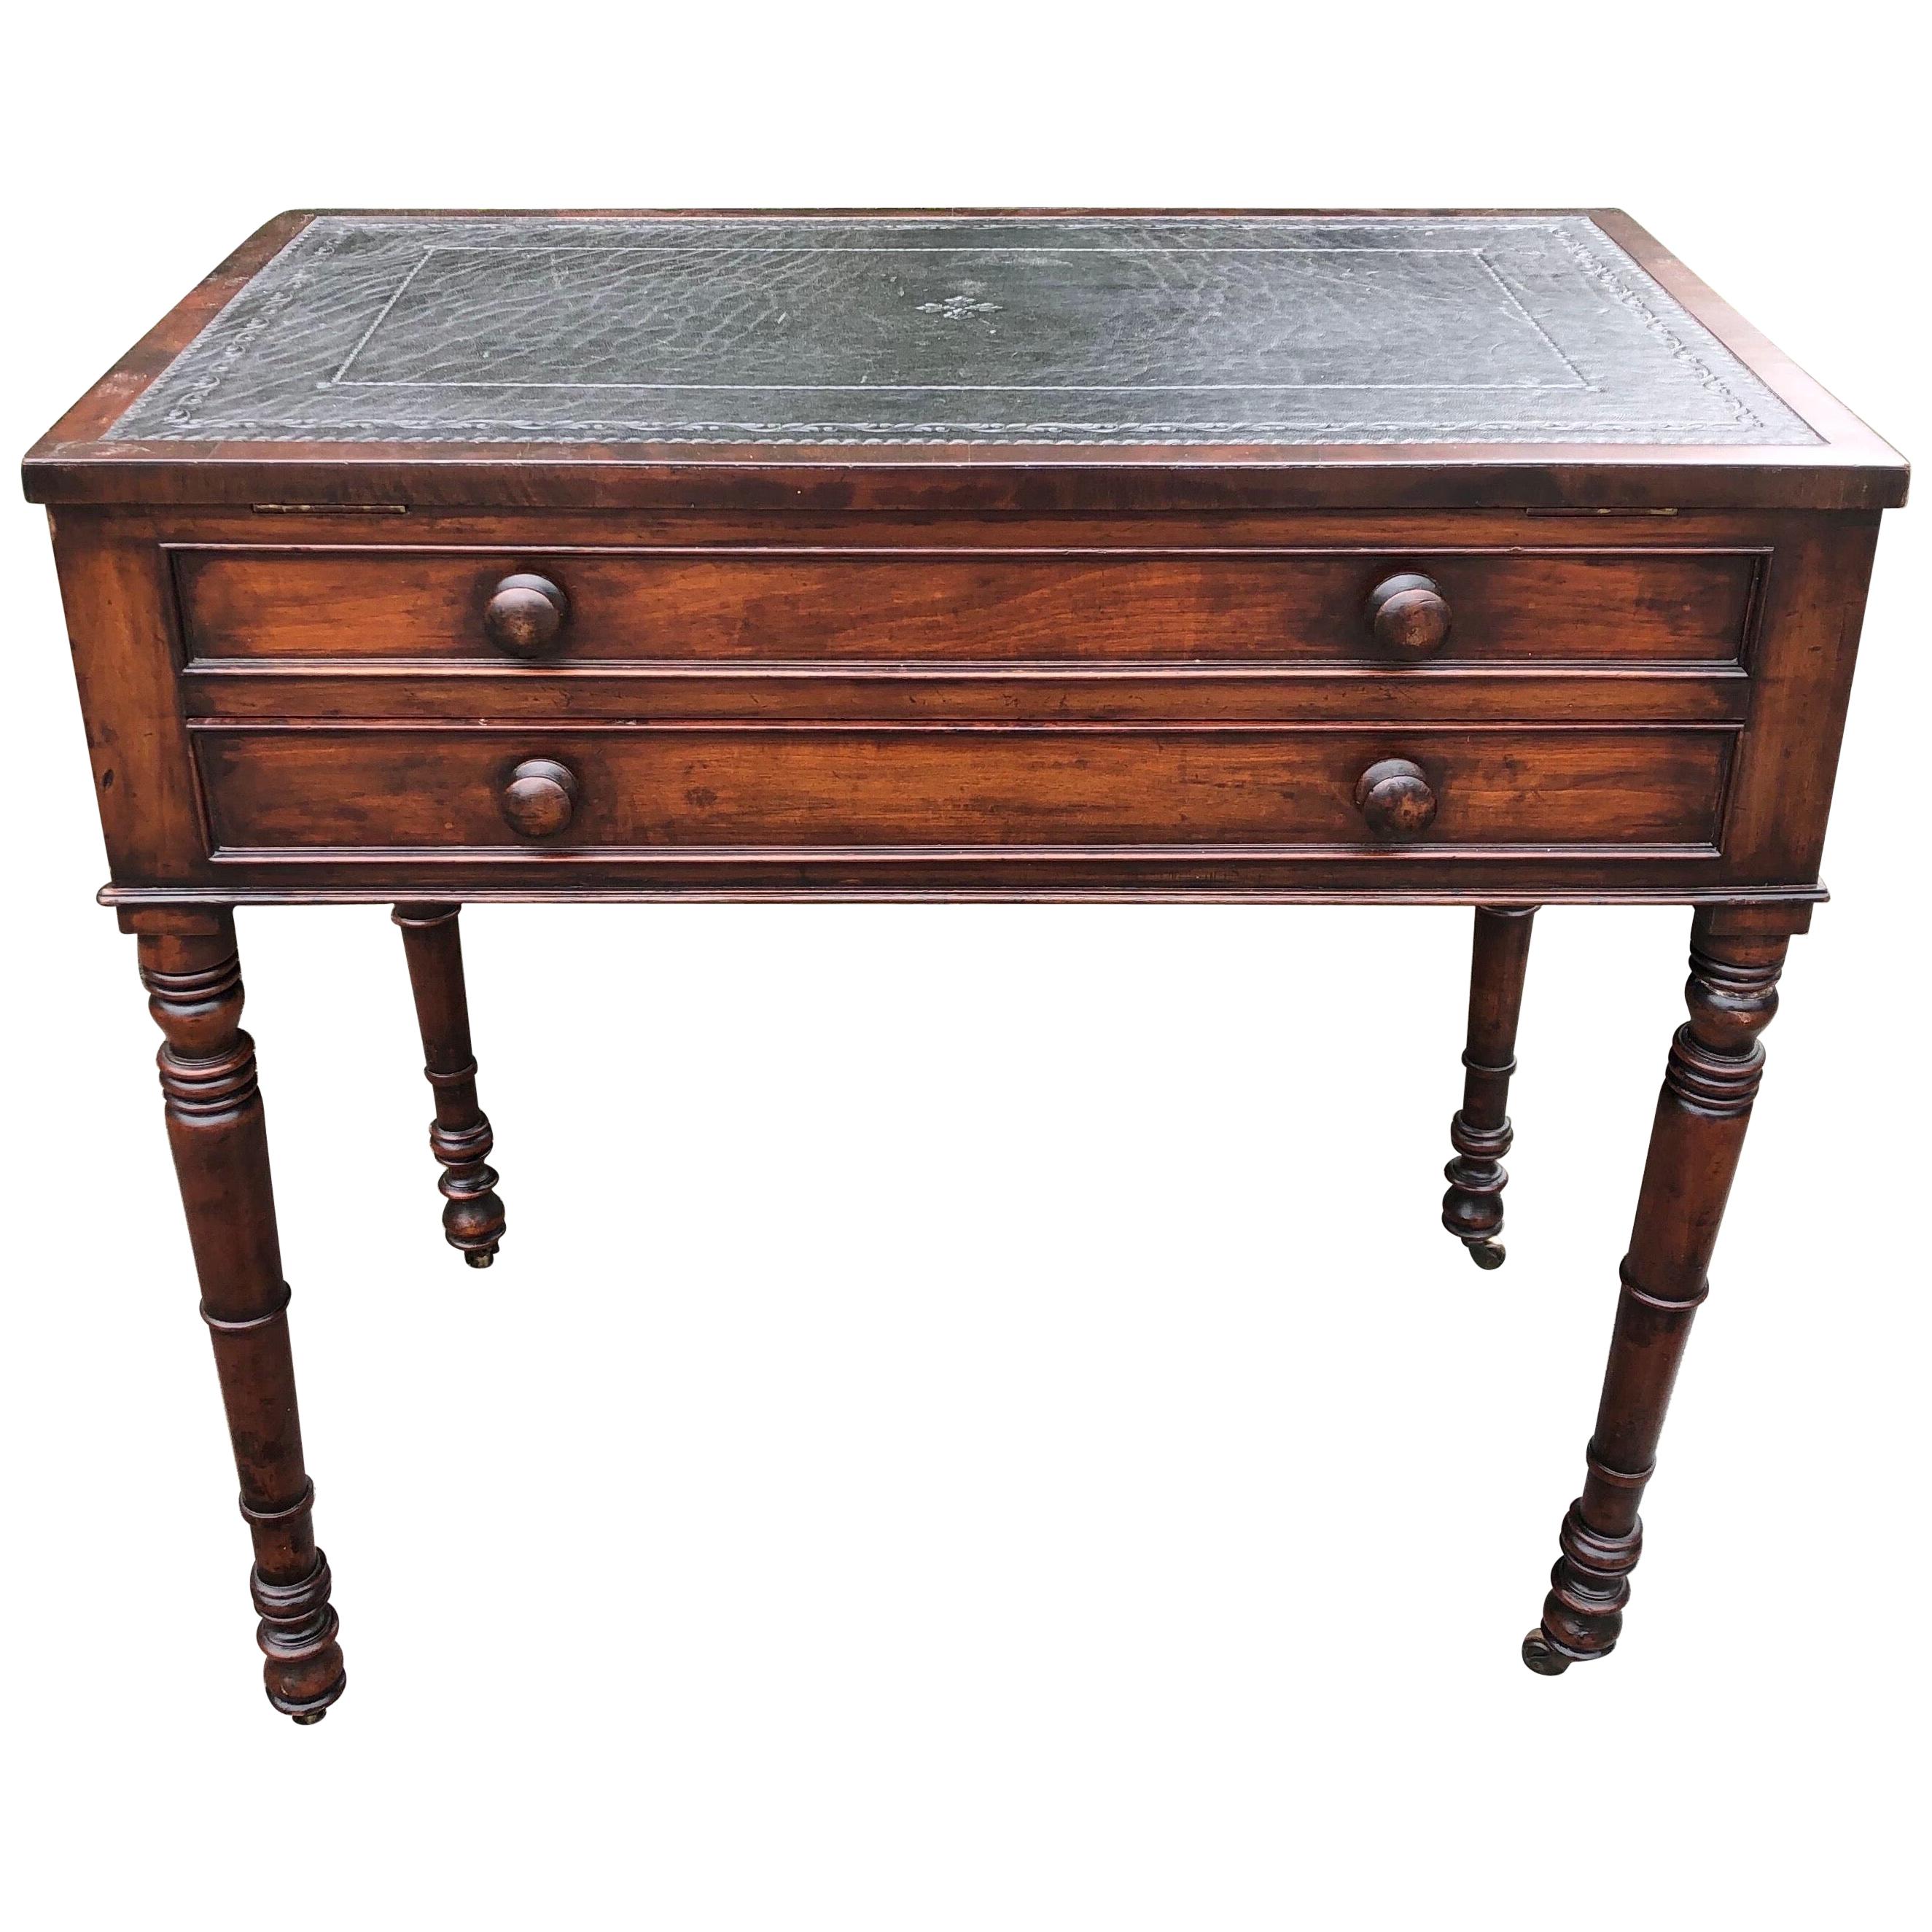 19th Century English Mahogany and Leather Top Architect's Style Desk